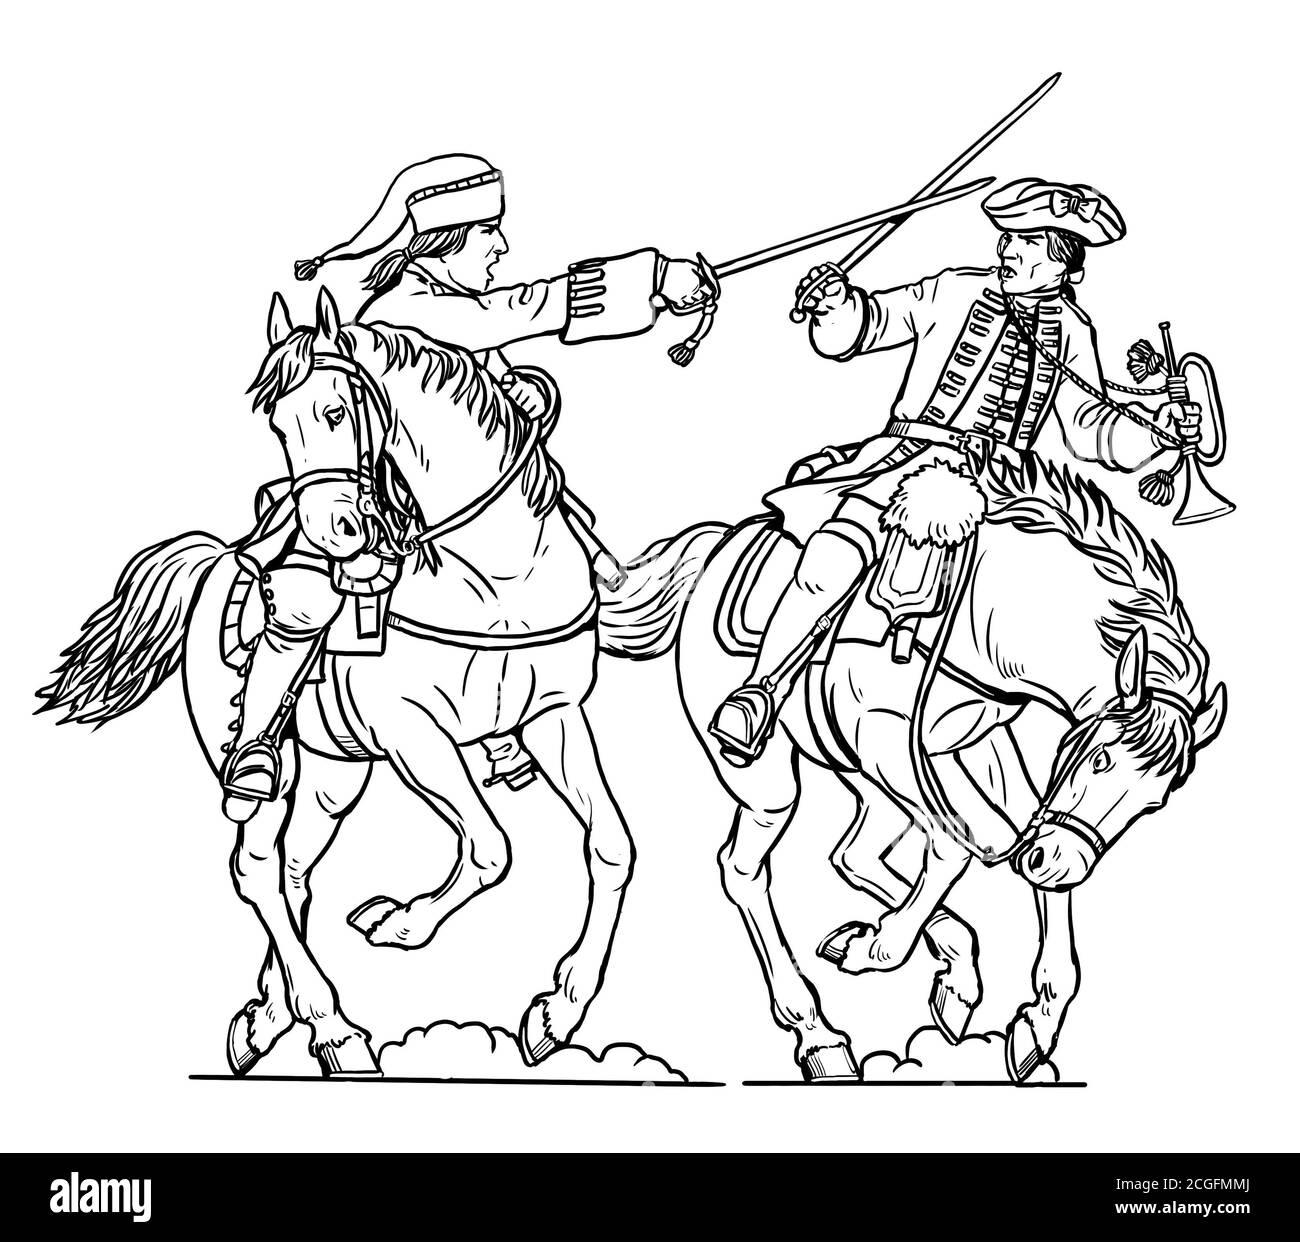 Duel of the cavalrymen. French dragoon against the english dragoon. Seven Years' War historical drawing. Stock Photo